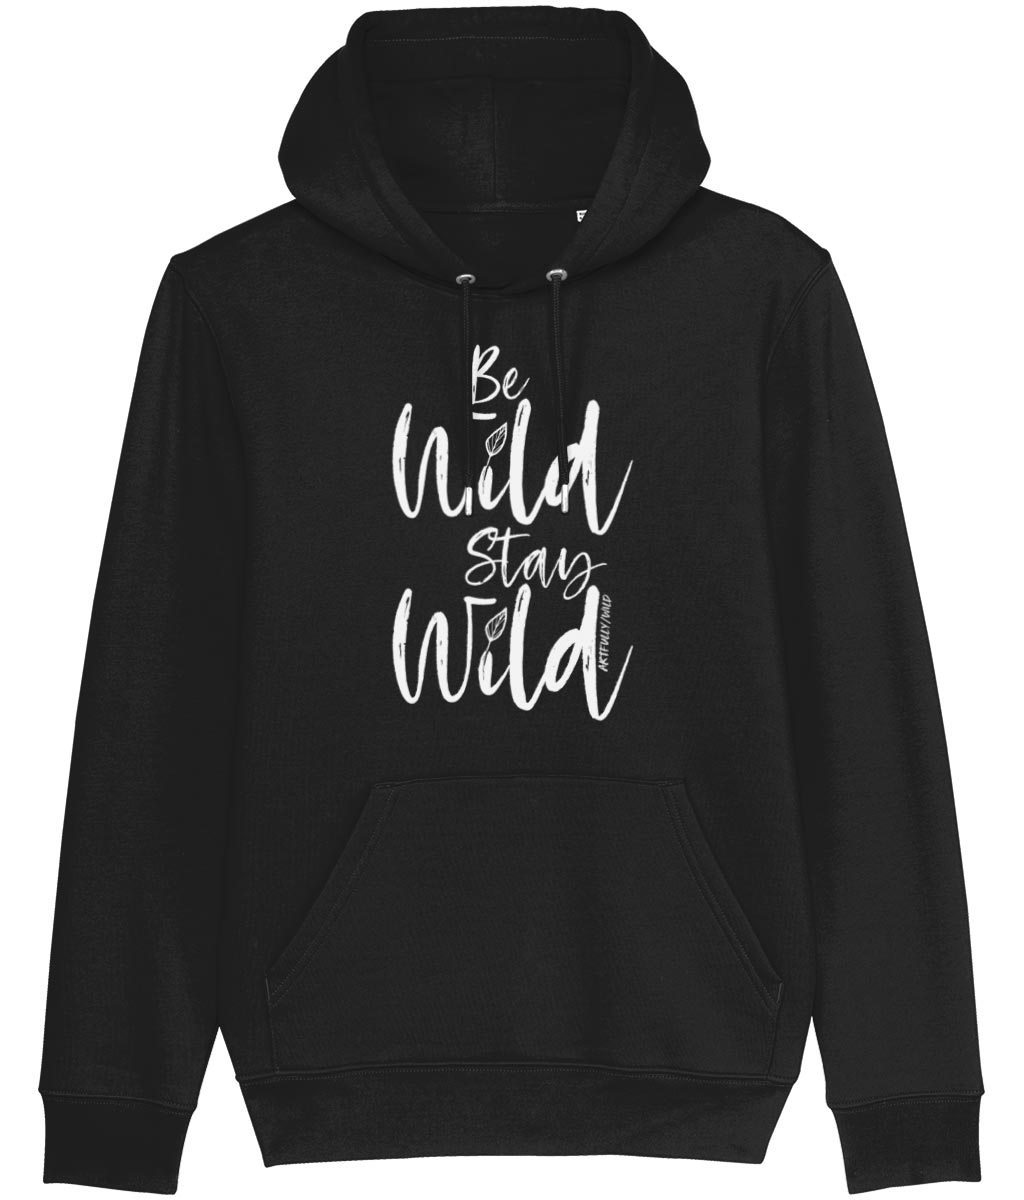 ‘BE WILD STAY WILD’ Classic Black Hoodie. Unisex/Men/Women. Made with Certified GOTS Organic Cotton. Printed in UK with water-based Inks. Sustainable Eco-friendly Clothing. Original Illustration by Artfully/Wild.